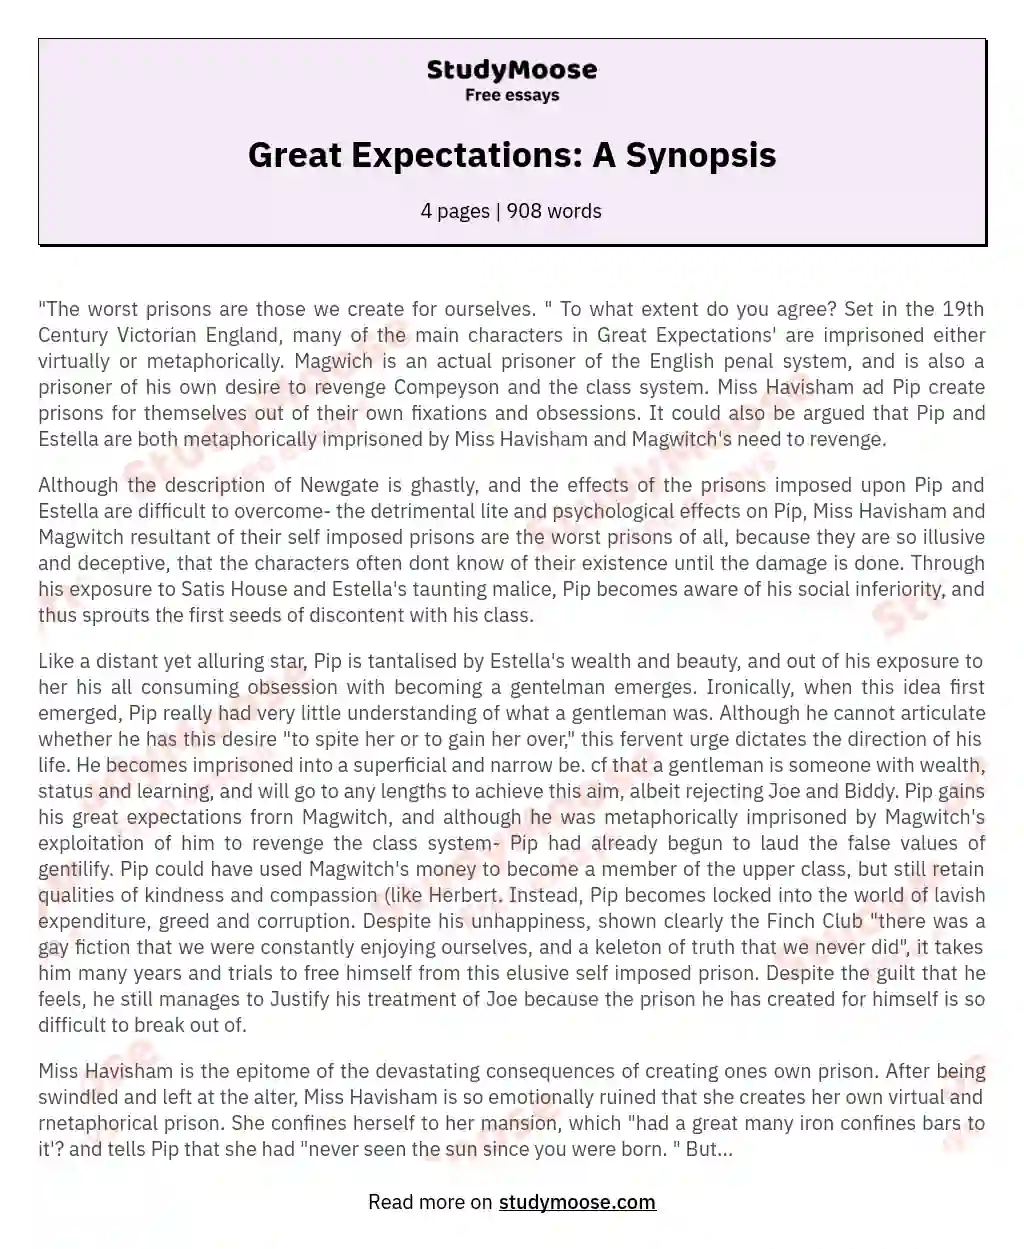 Great Expectations: A Synopsis essay